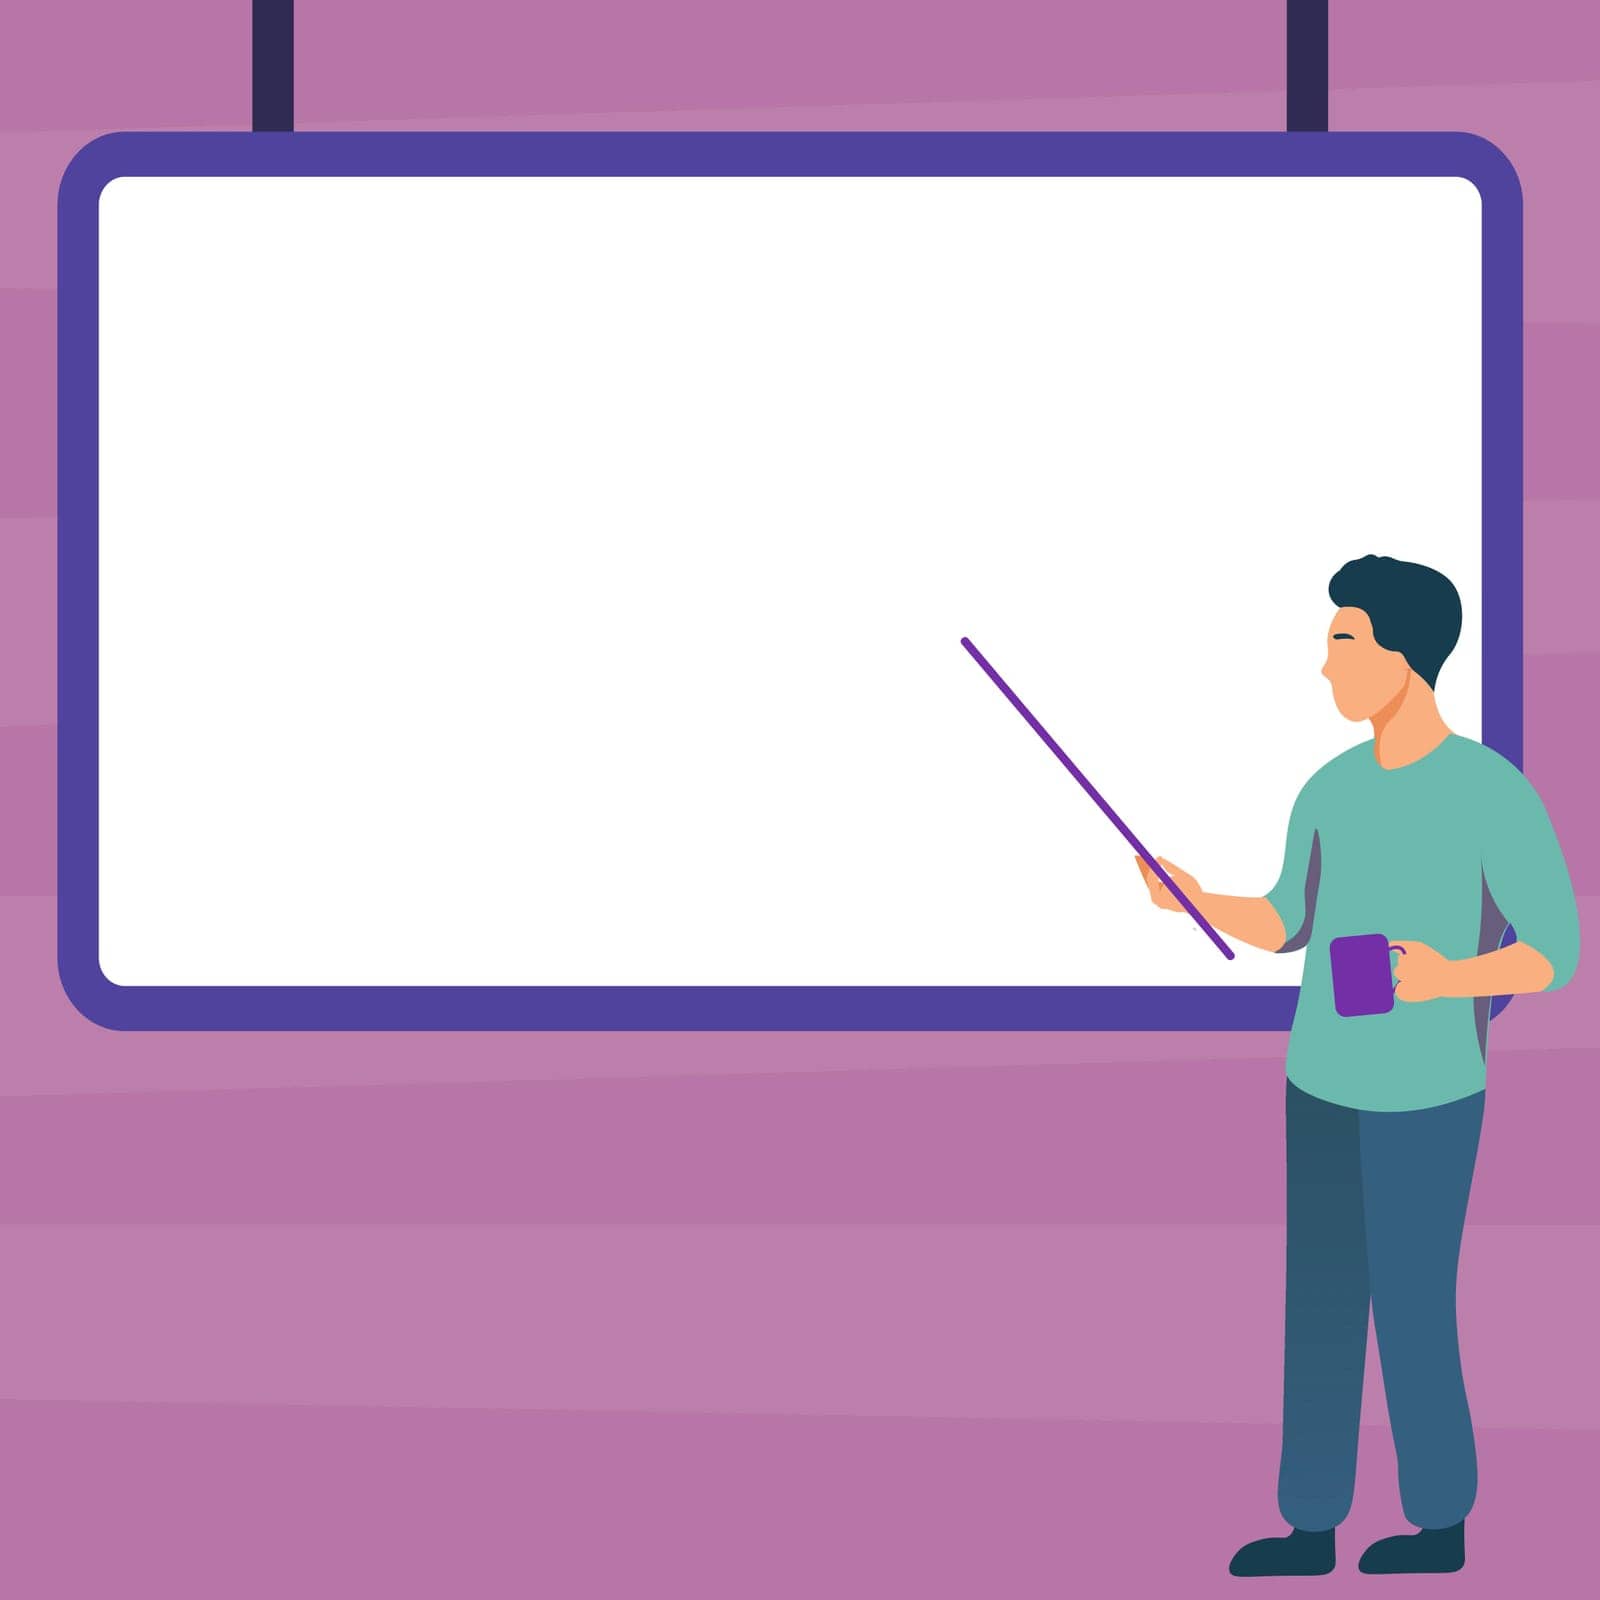 Man pointing with pointer stick to important information written on whiteboard. Large Conversation Balloon with New Ideas. Blank speech bubble contains Recent Updates. by nialowwa